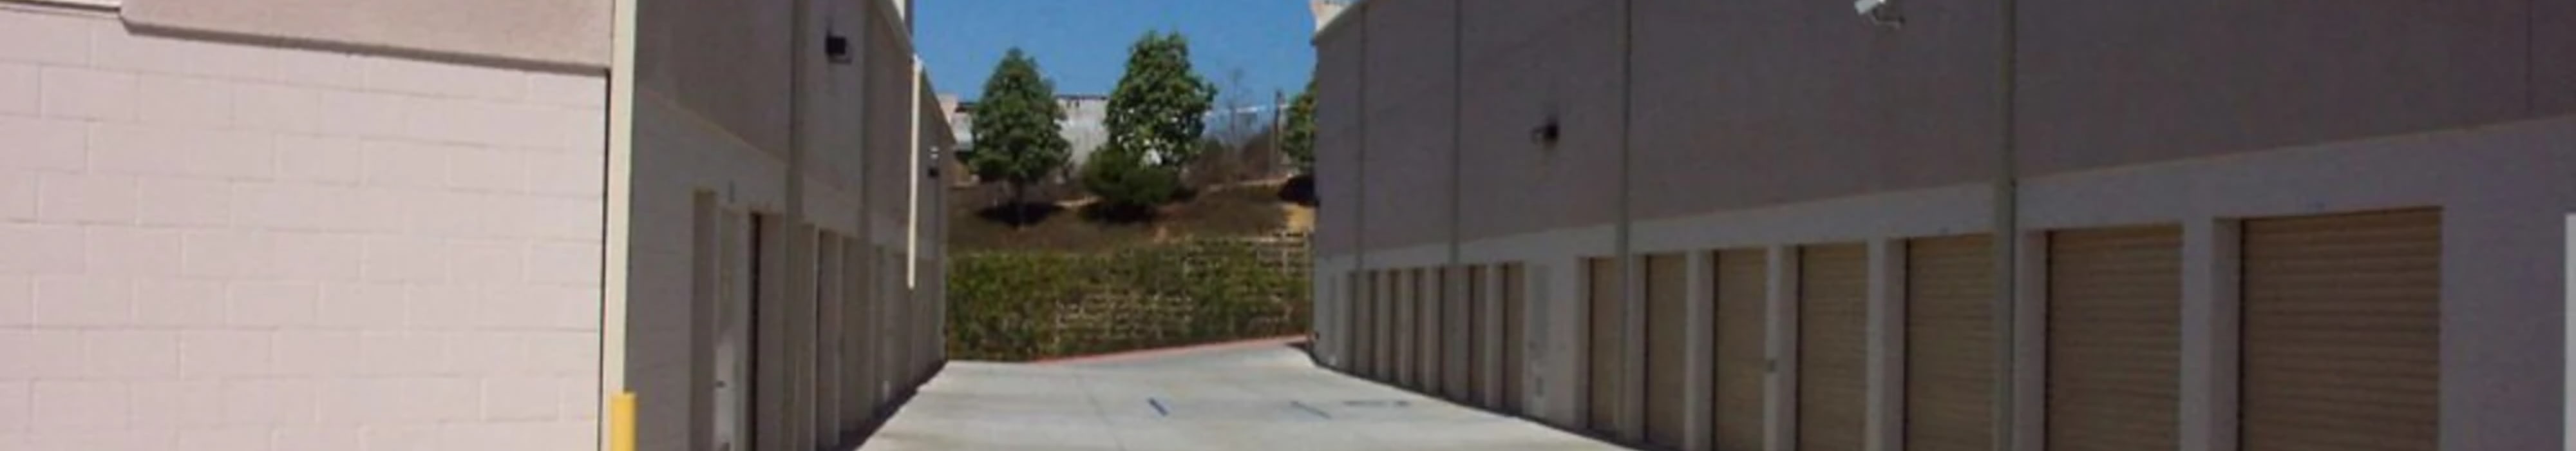 Outdoor units at Golden Triangle Self Storage in San Diego, California